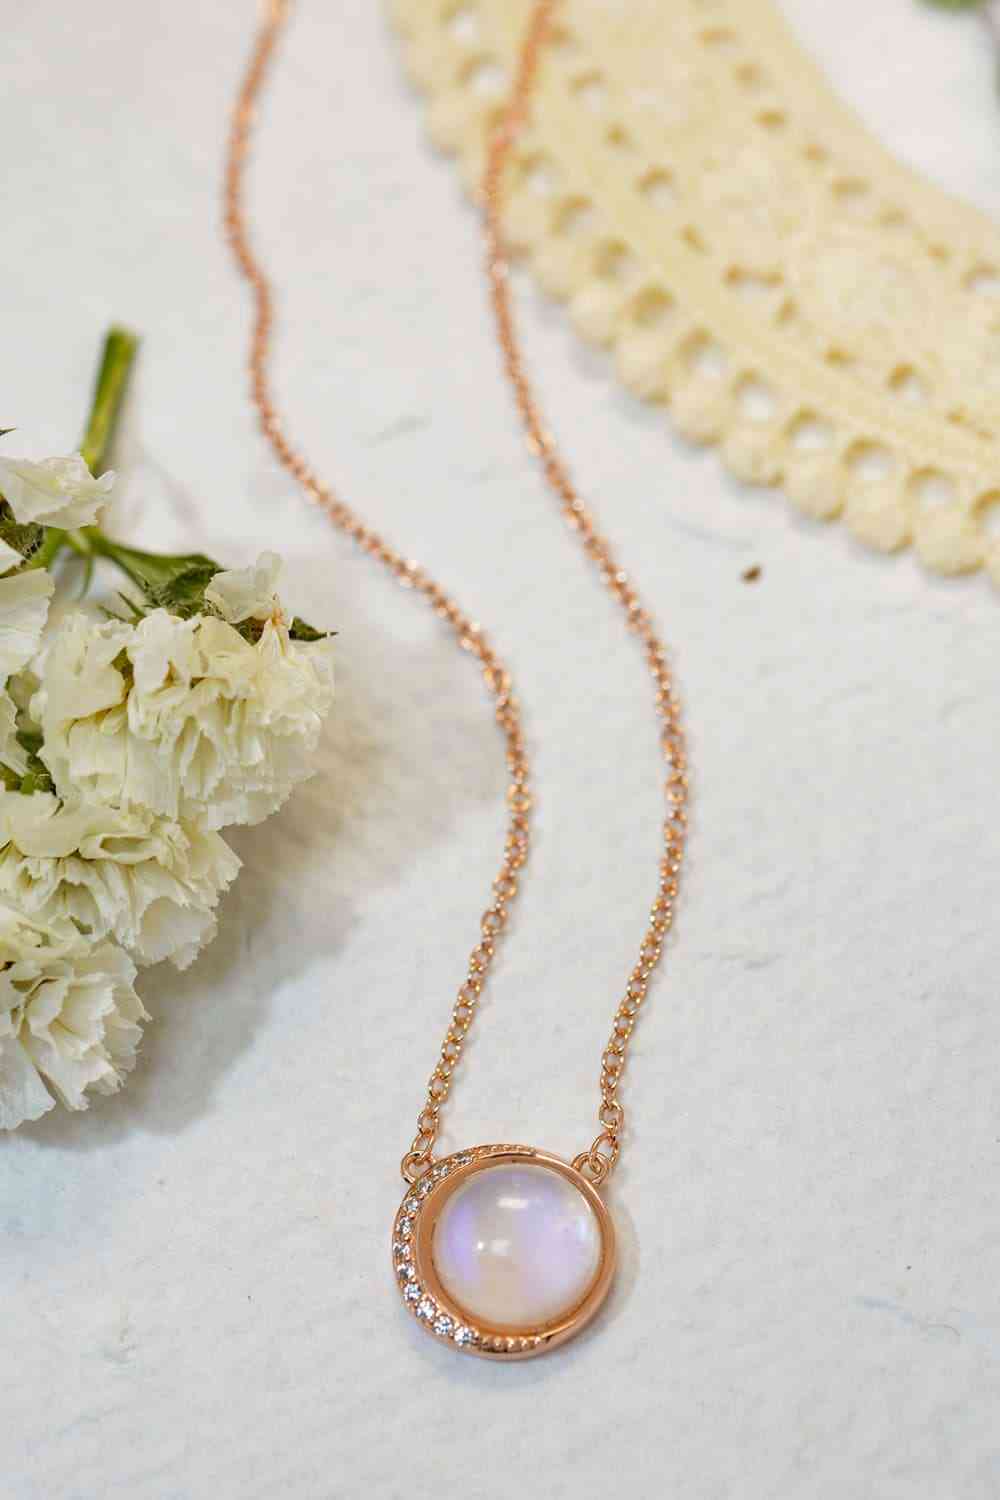 Moonstone Pendant Necklace - 18K Rose Gold-Plated Silver, Crafted for High Quality and Natural Beauty